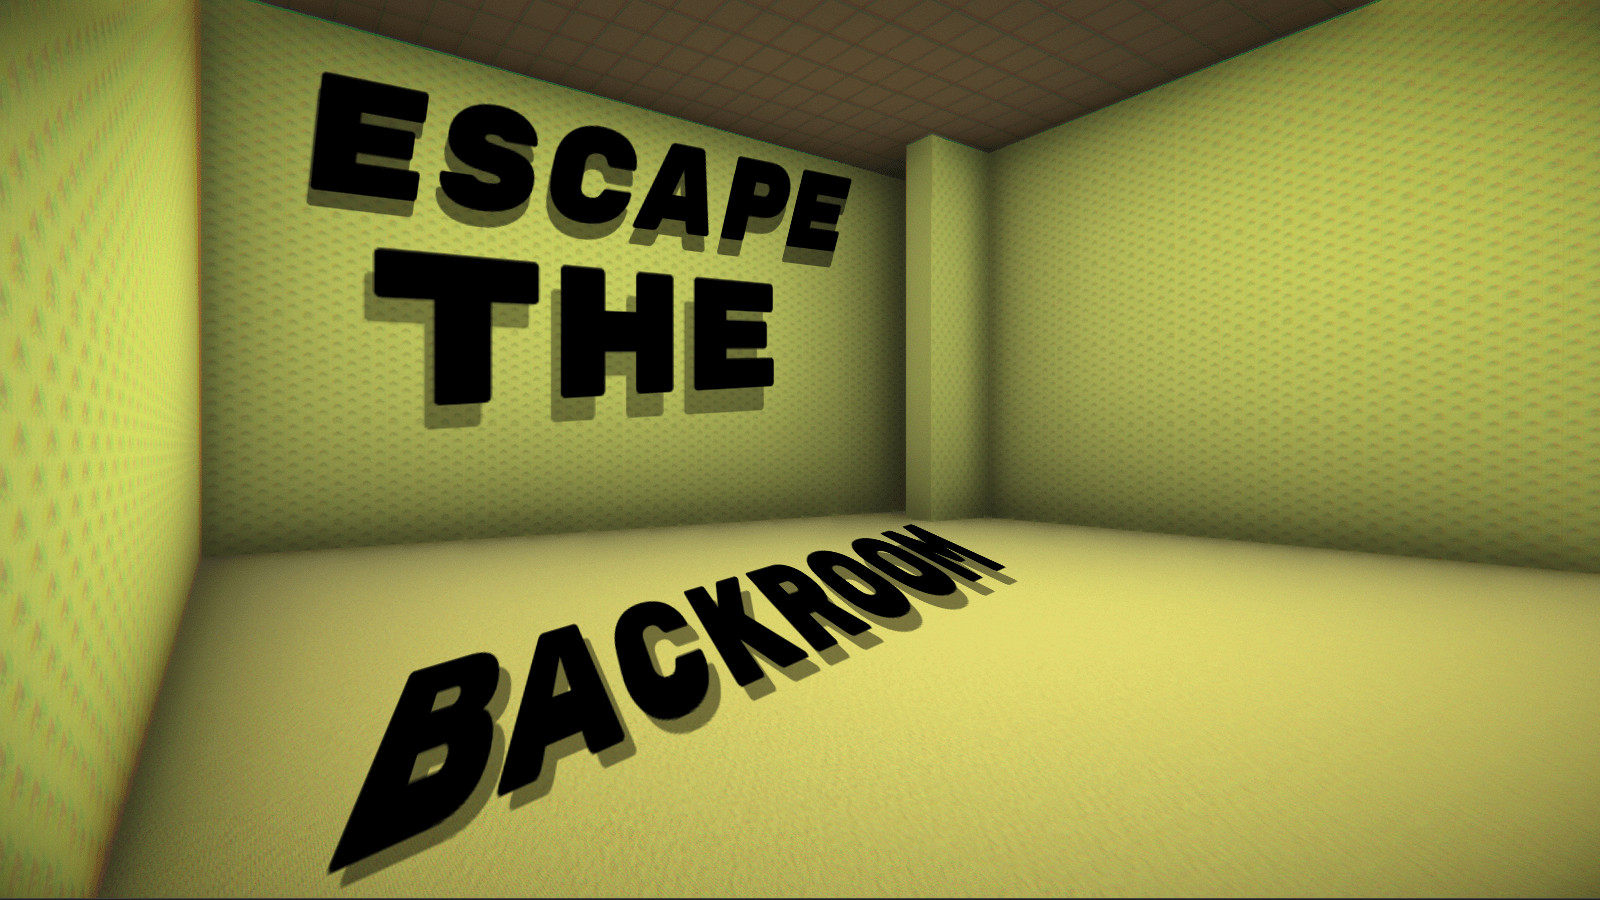 How long is Escape the Backrooms?